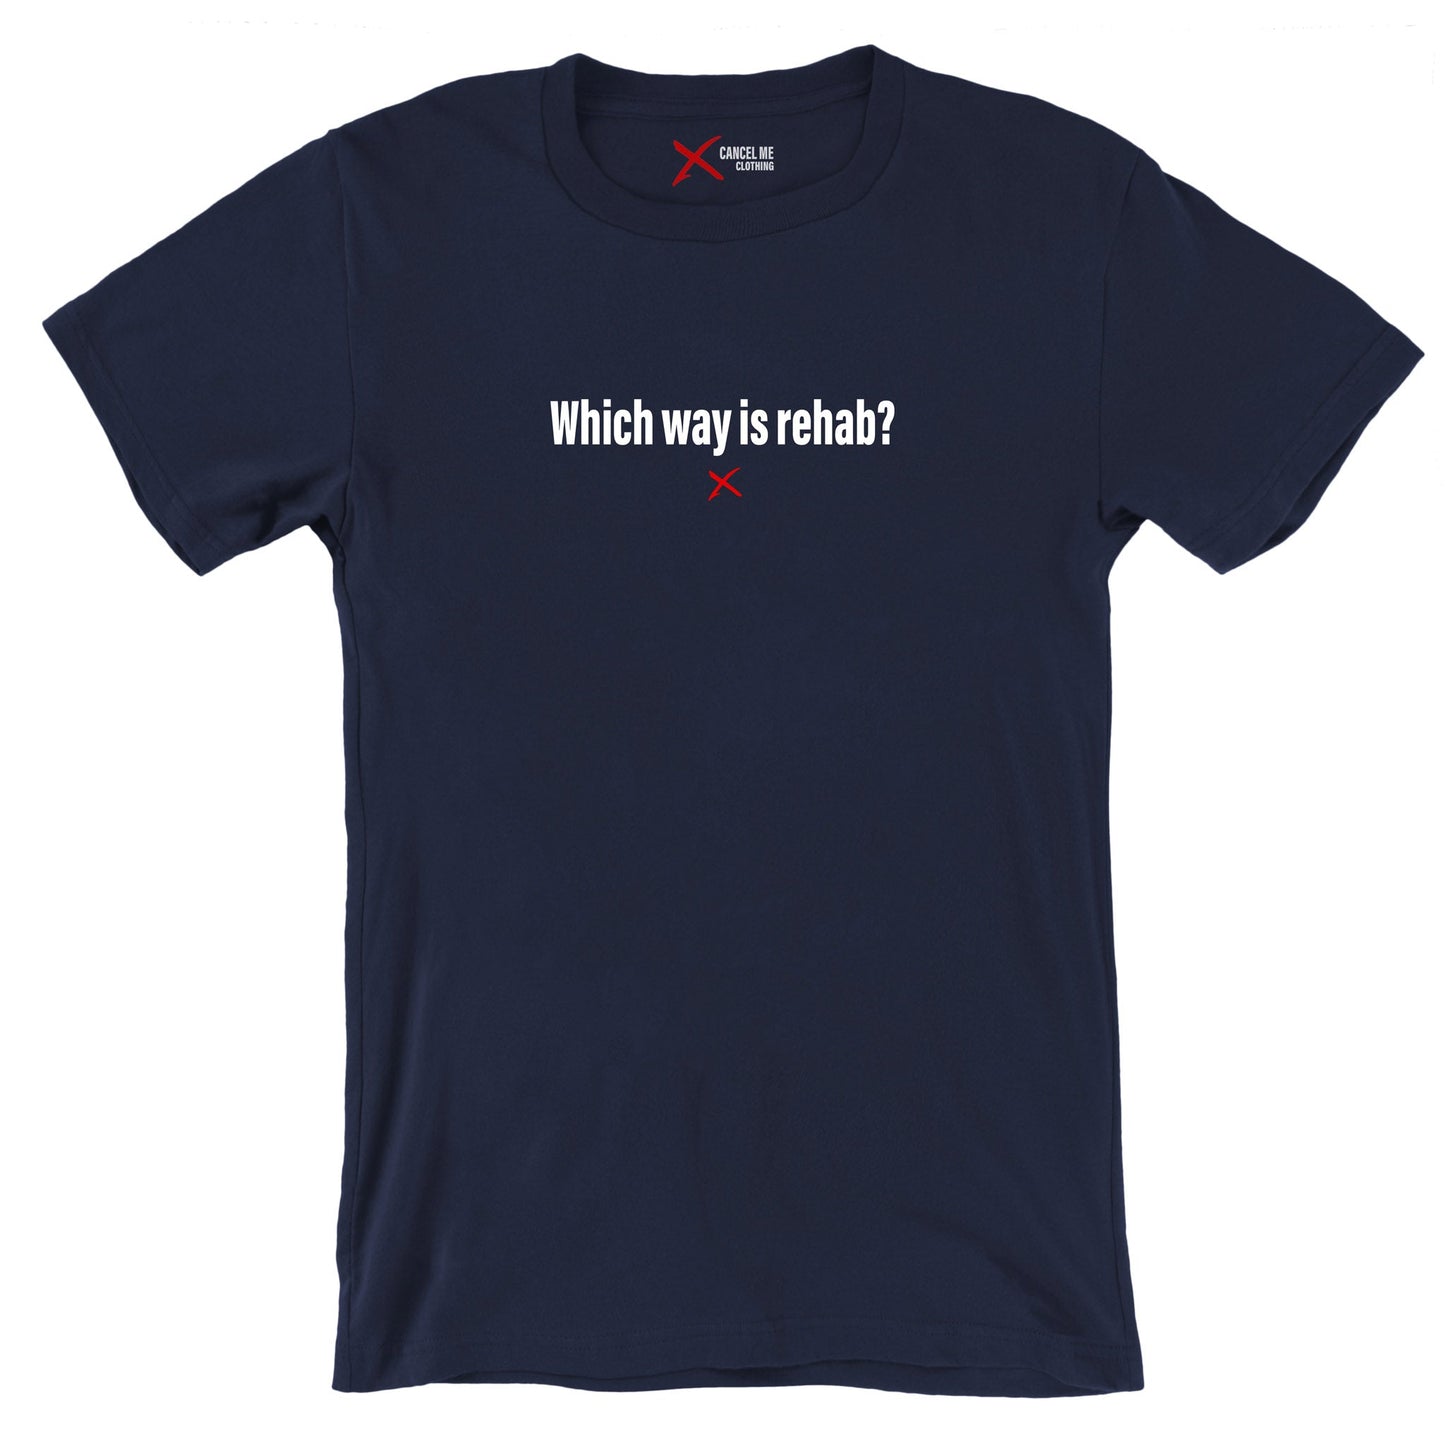 Which way is rehab? - Shirt